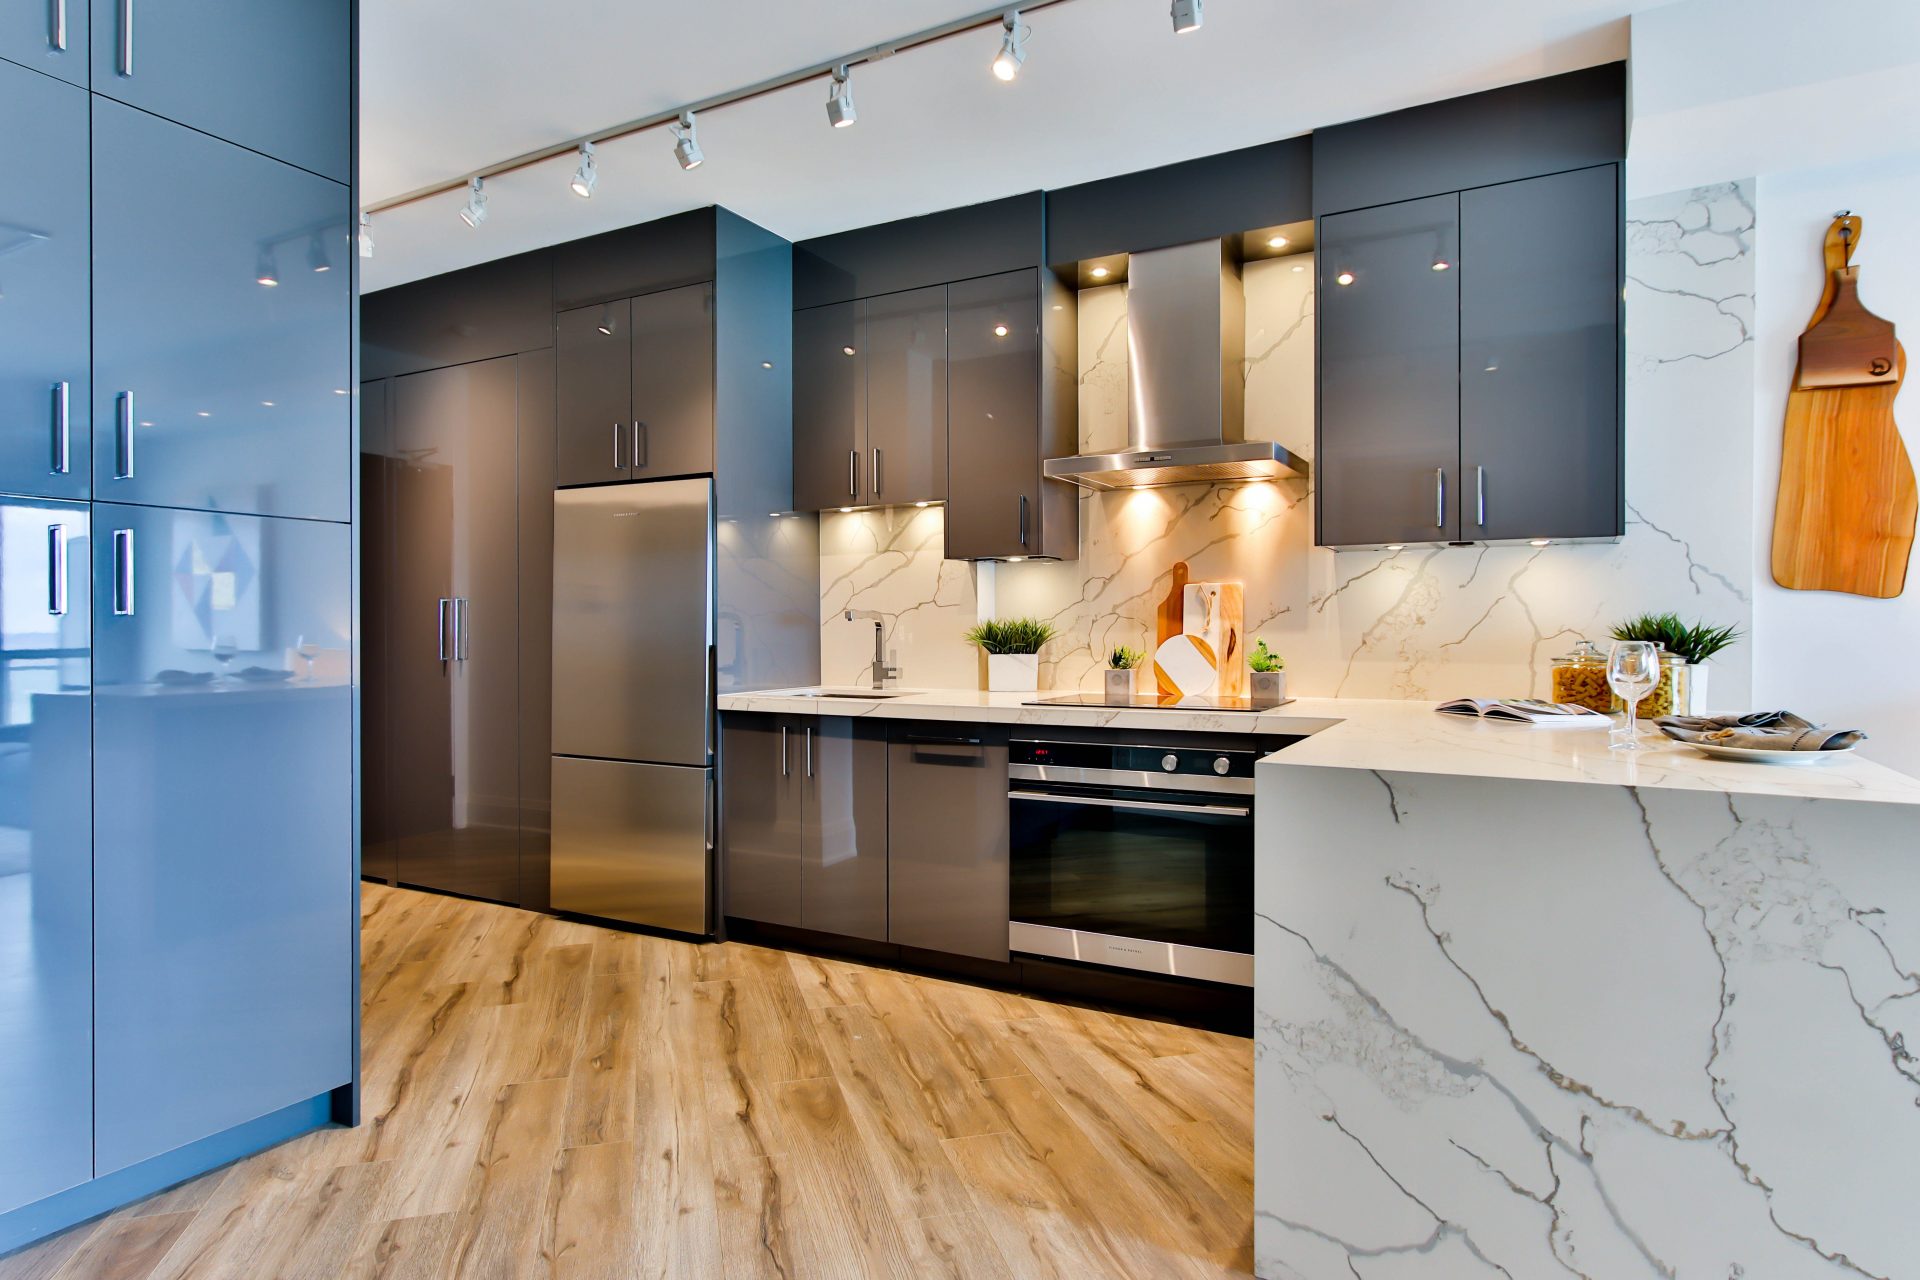 Kitchen with wood floor, black and blue cabine and a marble counter and backsplash